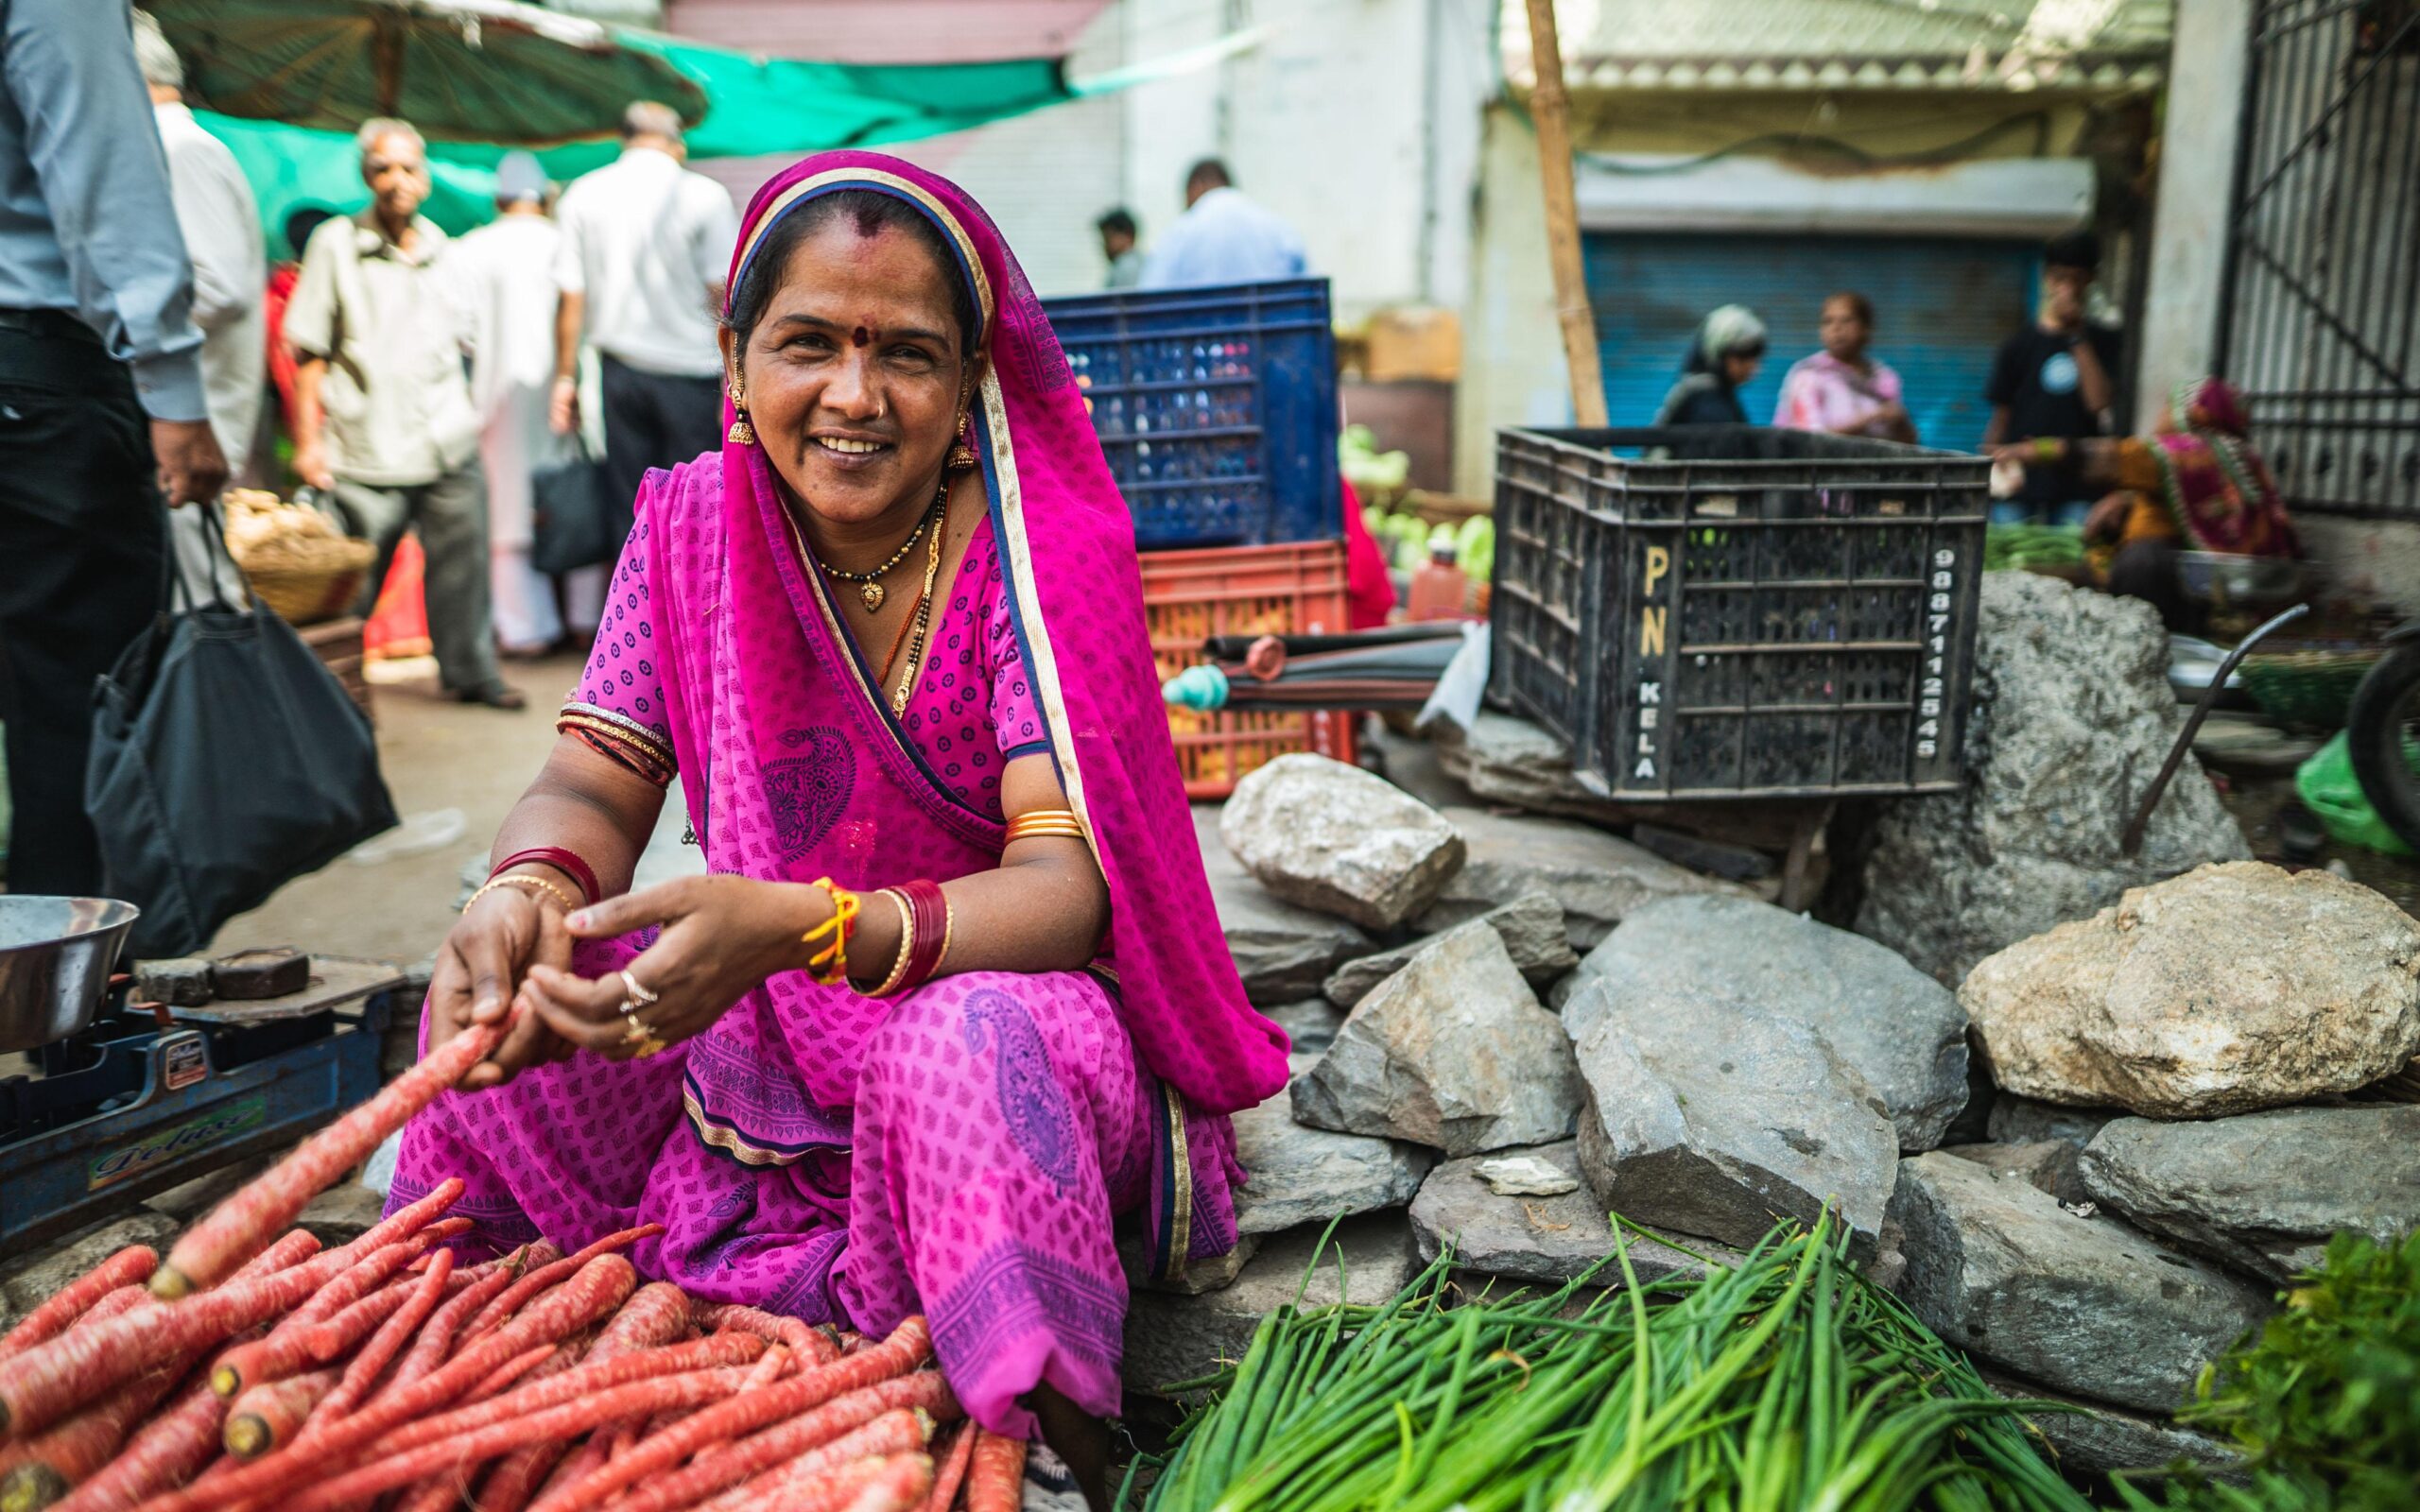 Indian woman wearing a pink sari smiling and sitting down cooking in a local market